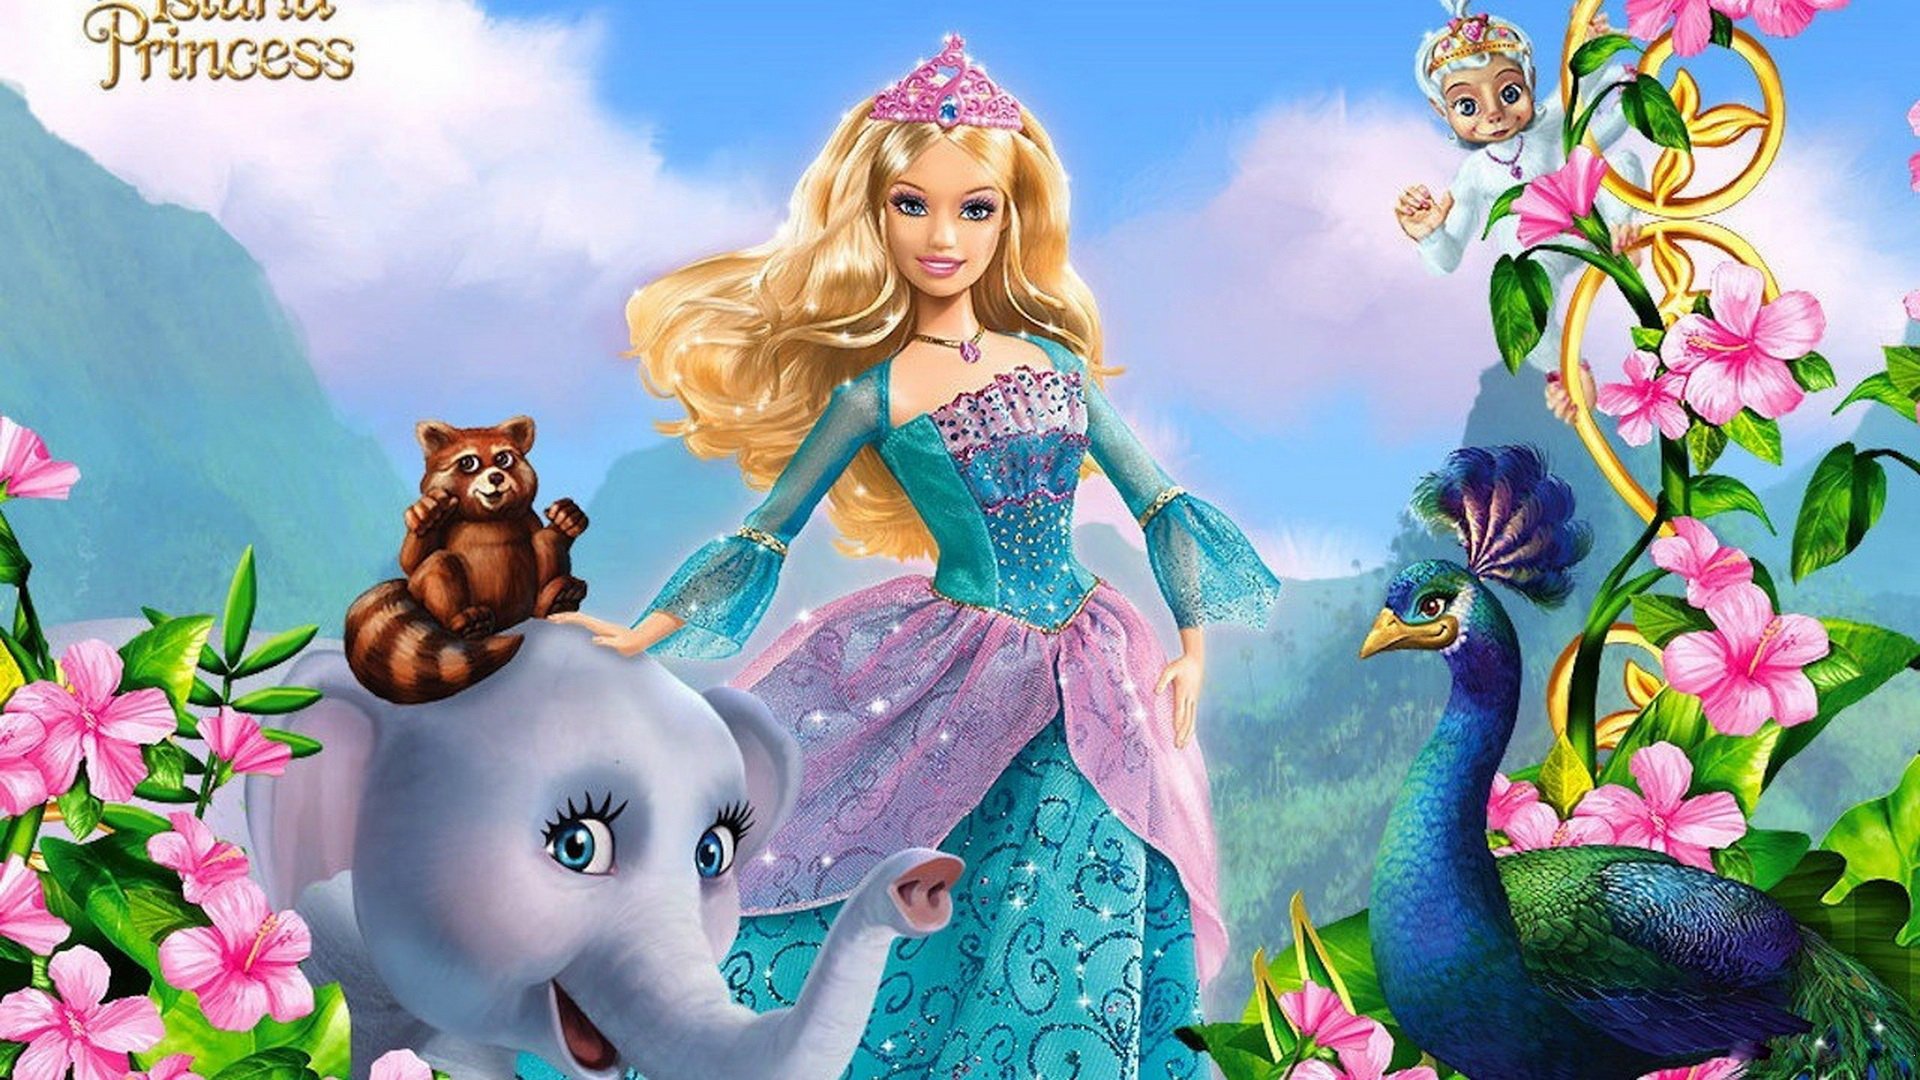 barbie princess and the pauper pc game download